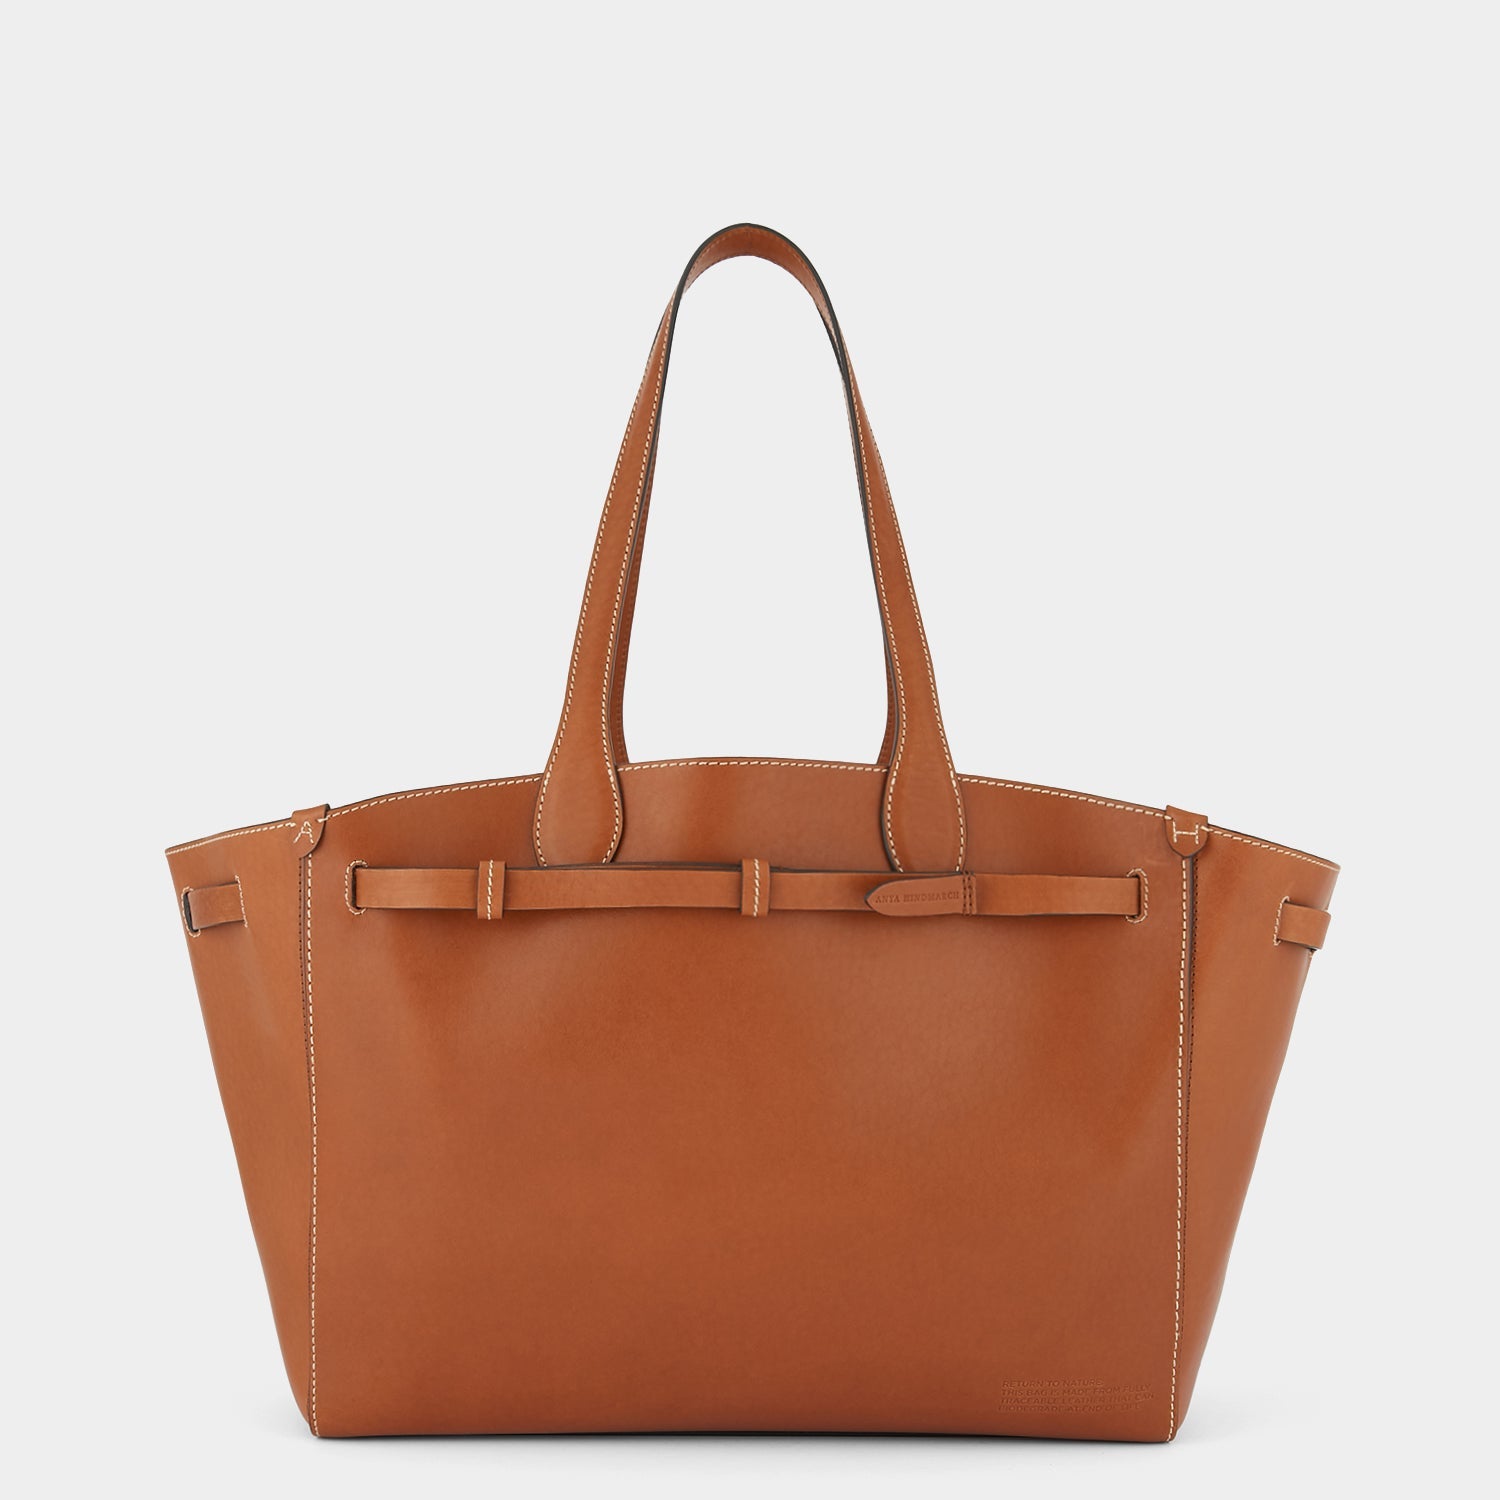 Anya Hindmarch Return to Nature Leather Tote Bag